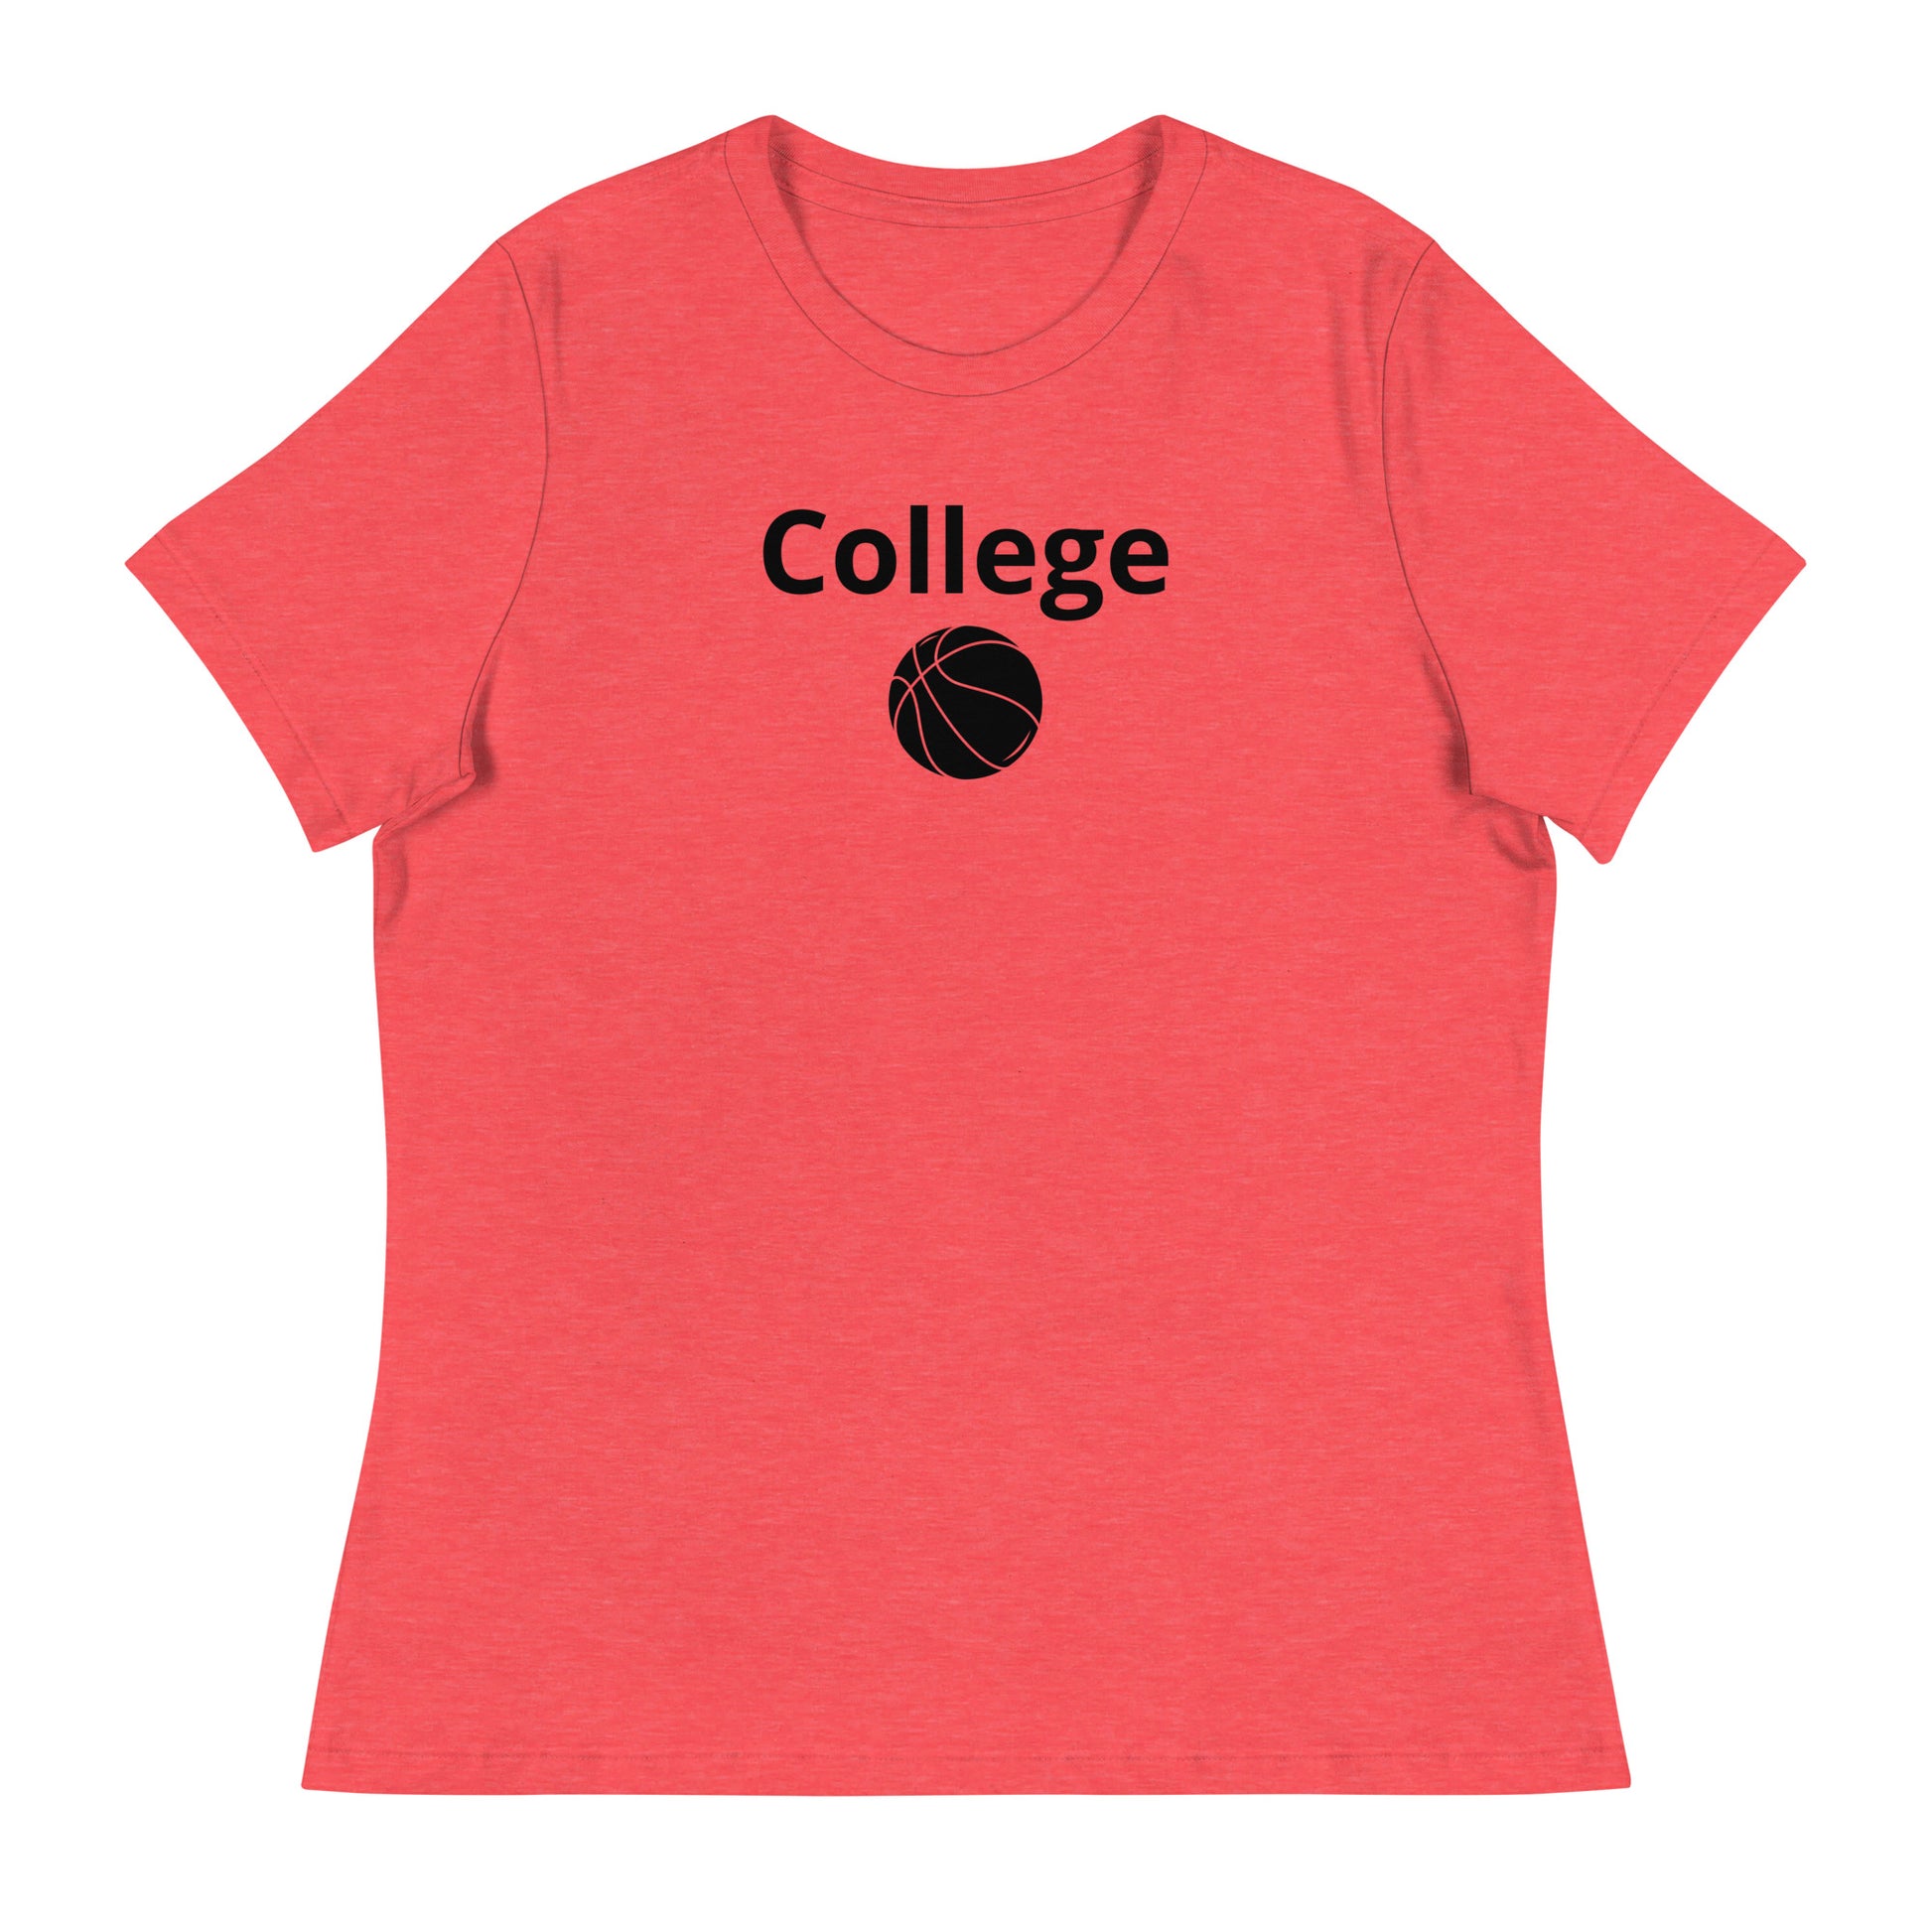 Women's college basketball graphic tee shirt in heather red